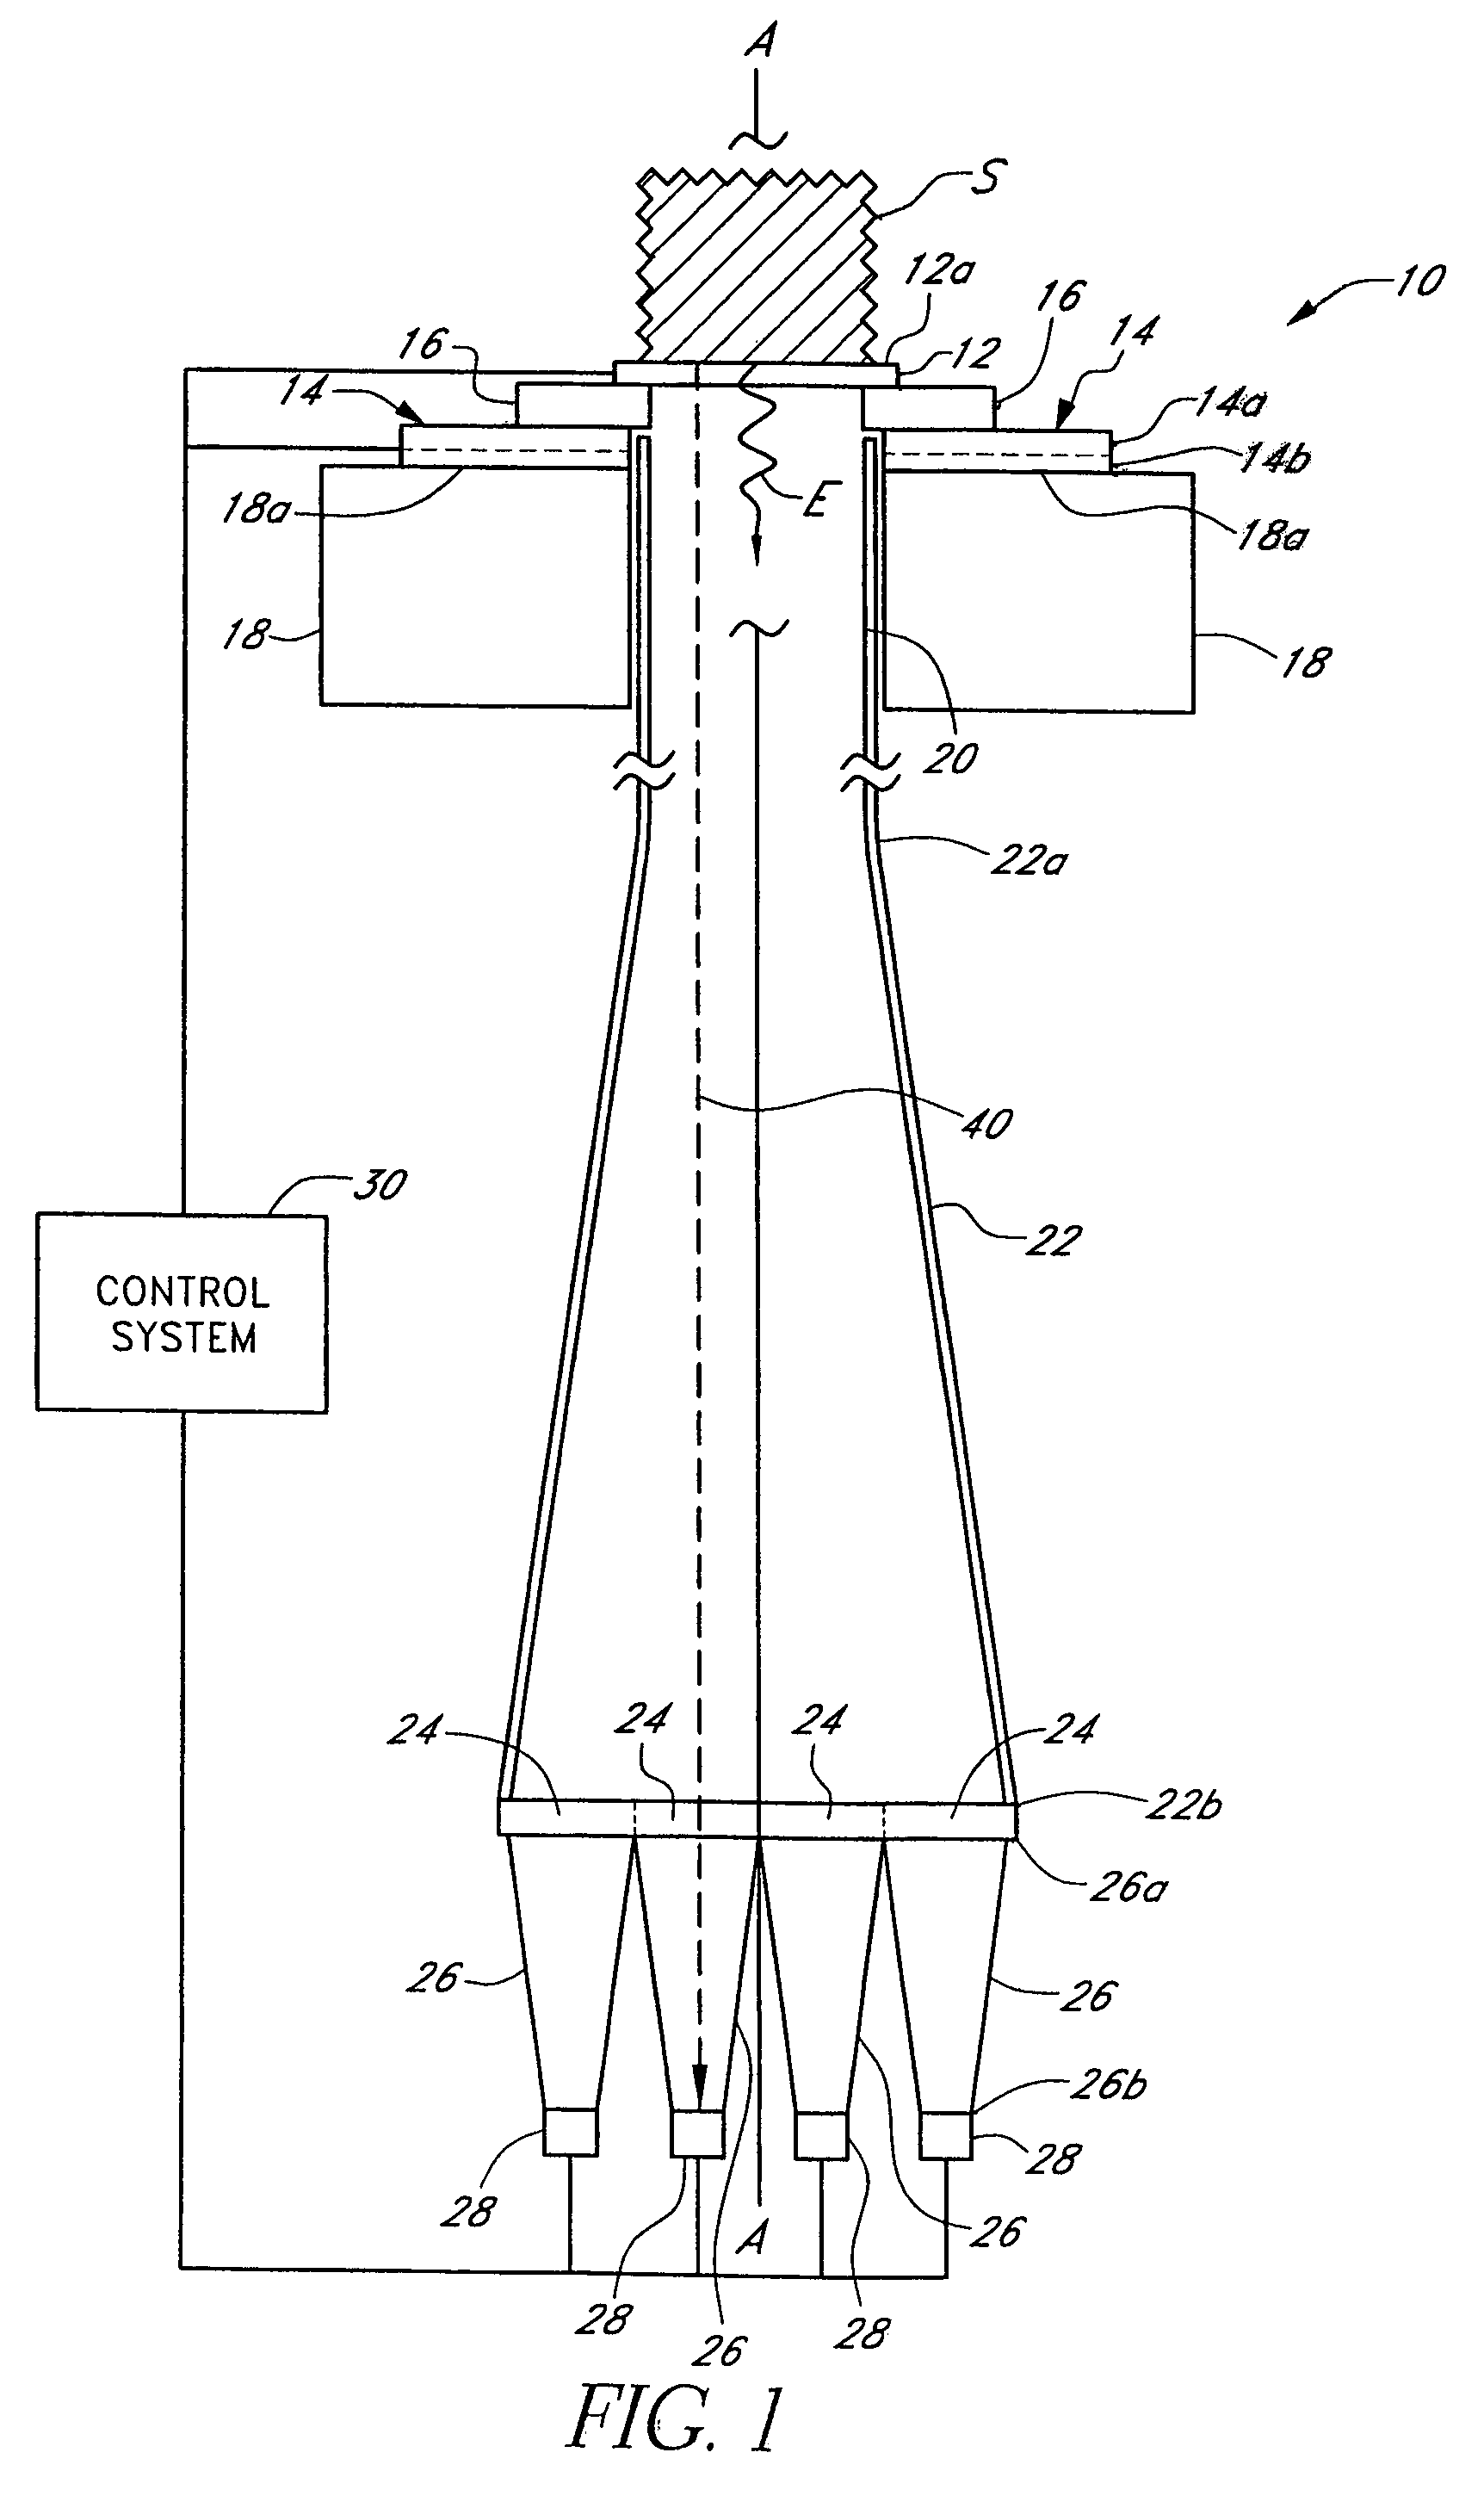 Device and method for in vitro determination of analyte concentrations within body fluids